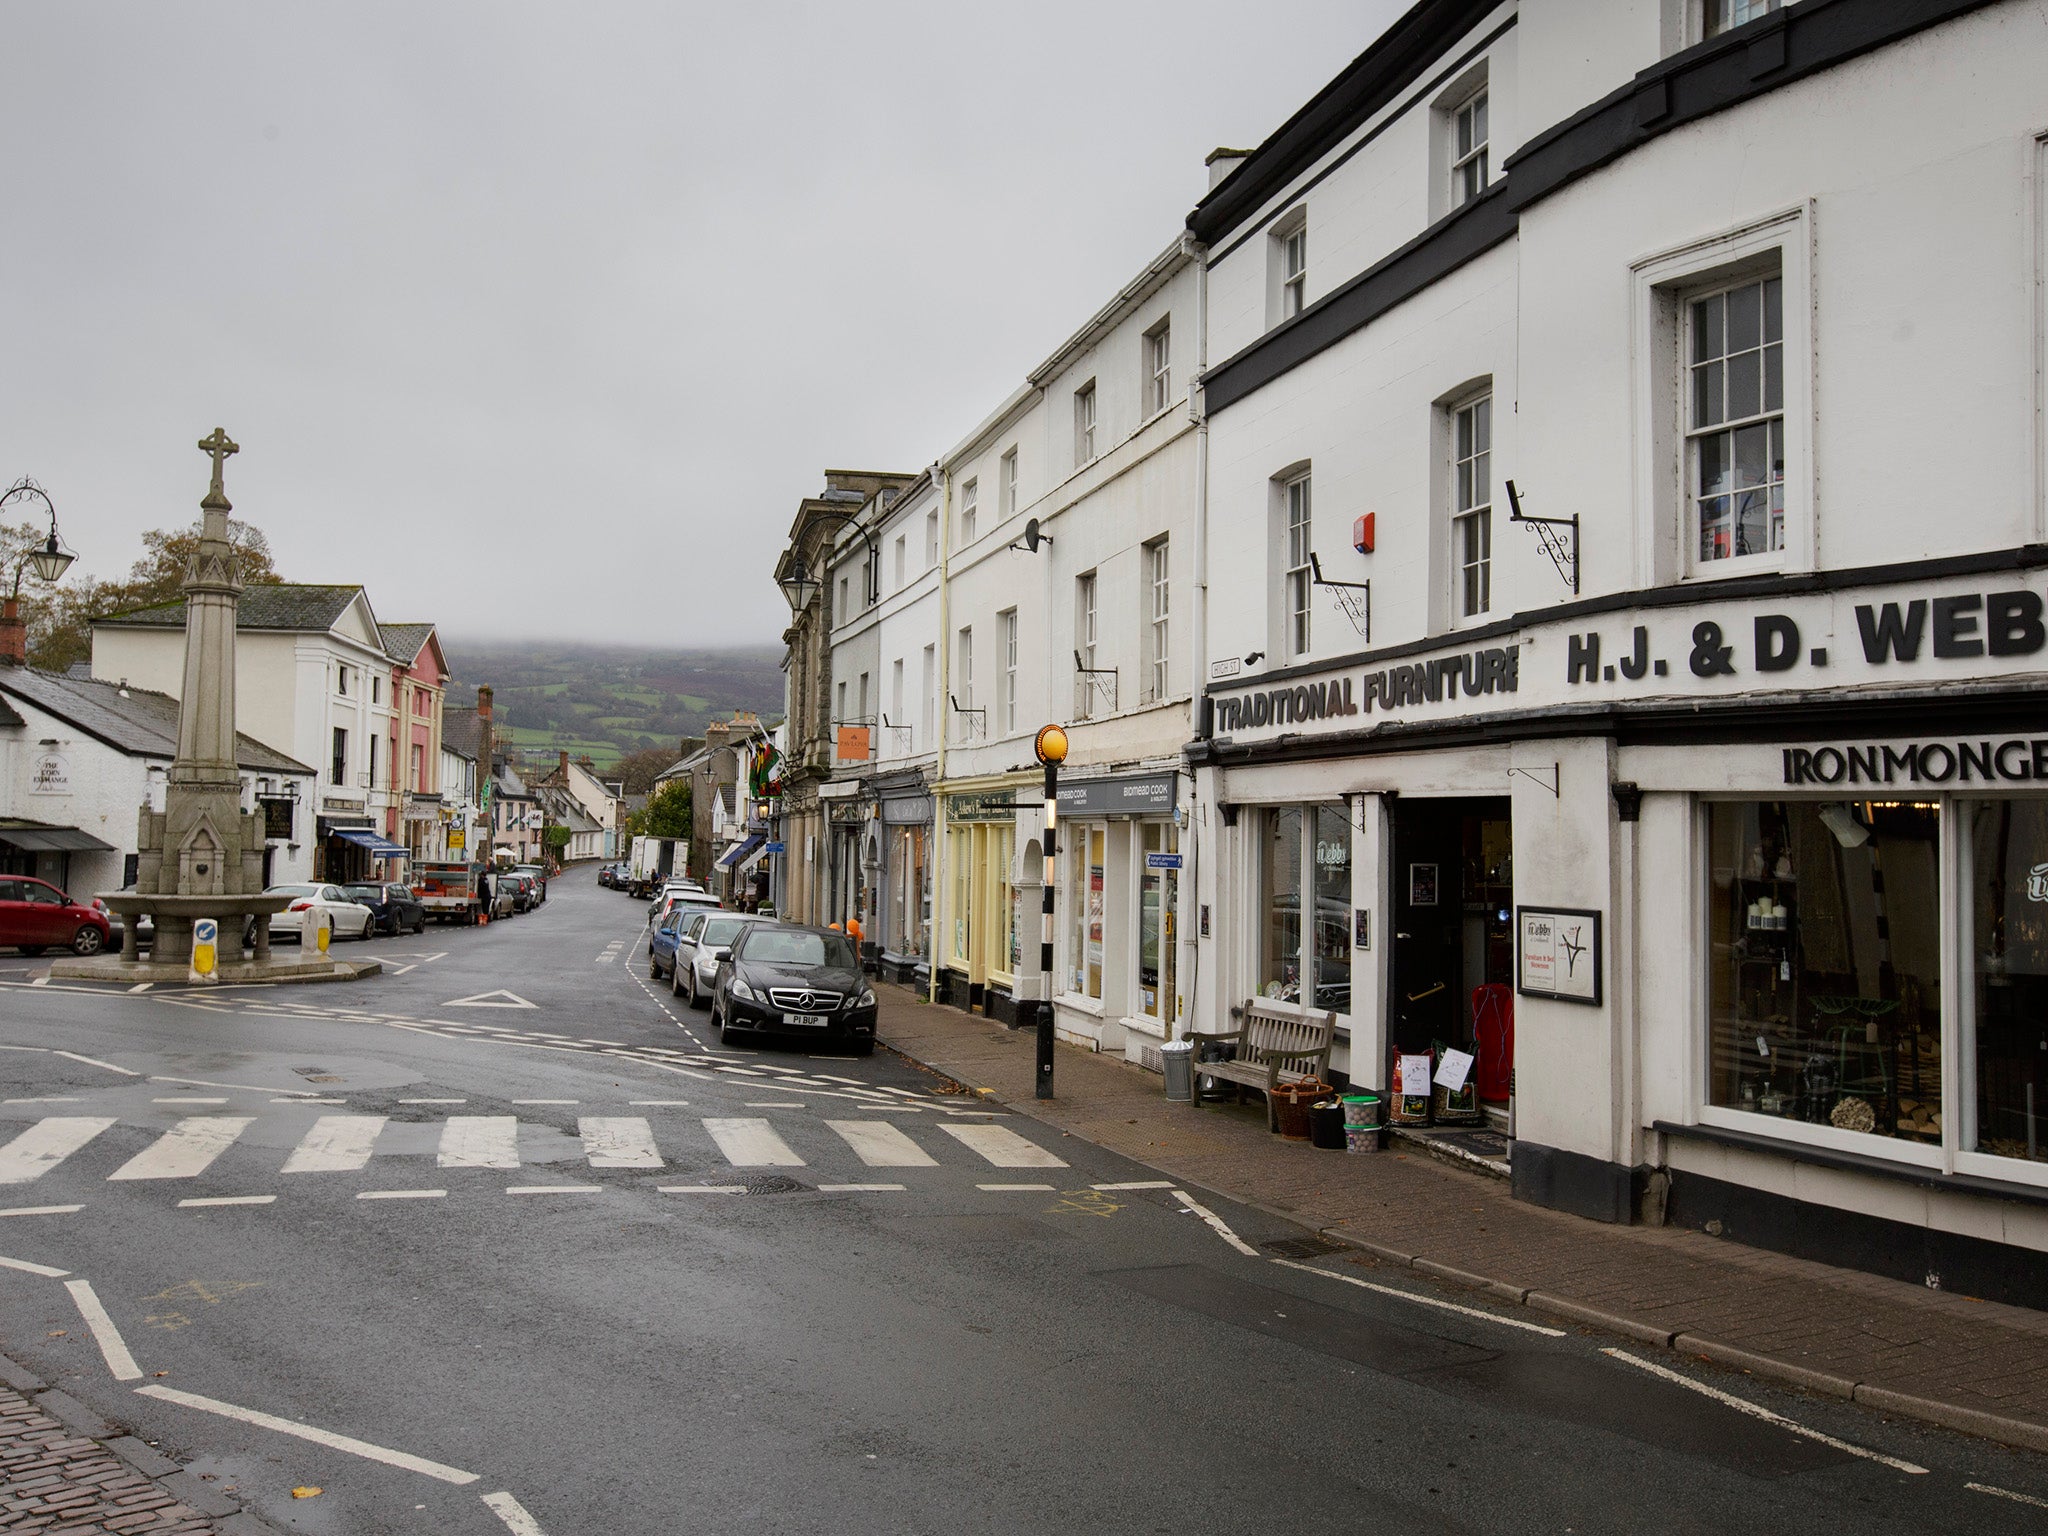 The Welsh town of Crickhowell, which has "moved offshore" to avoid paying tax.